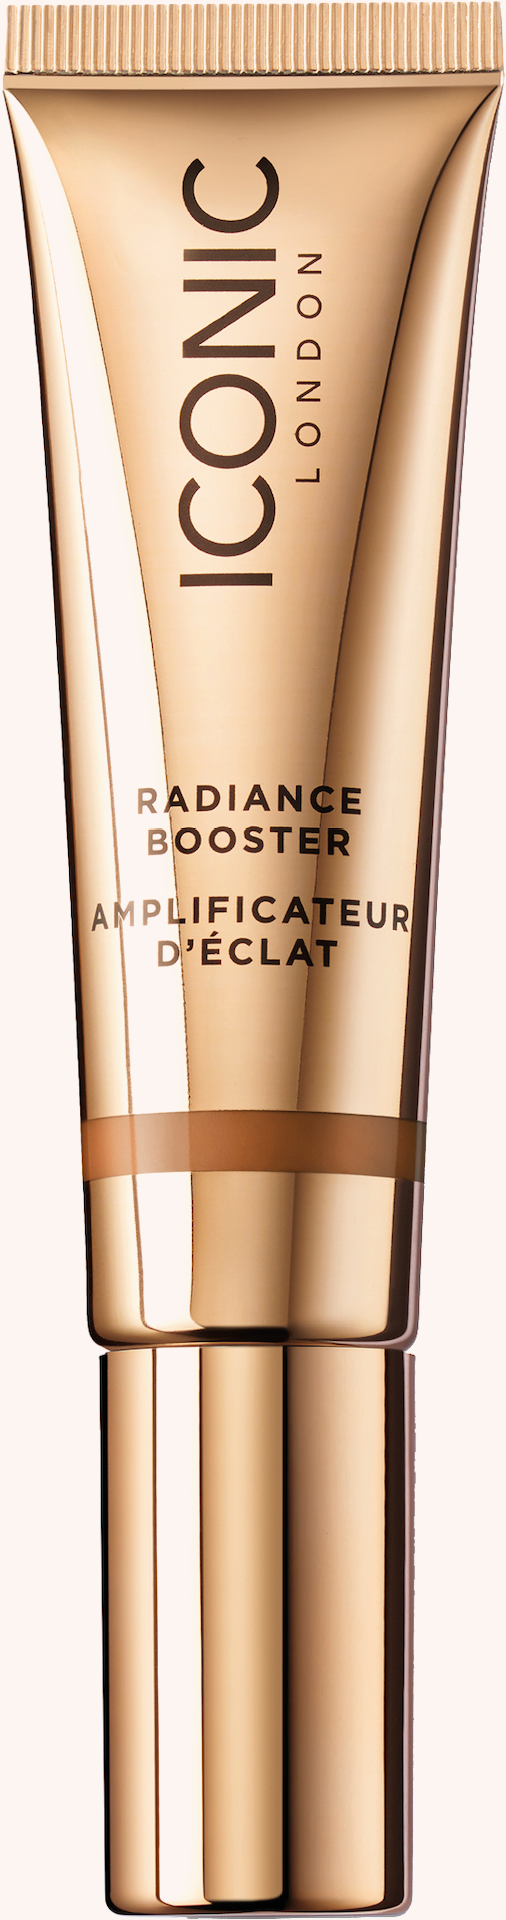 Radiance Booster Toffee Glow